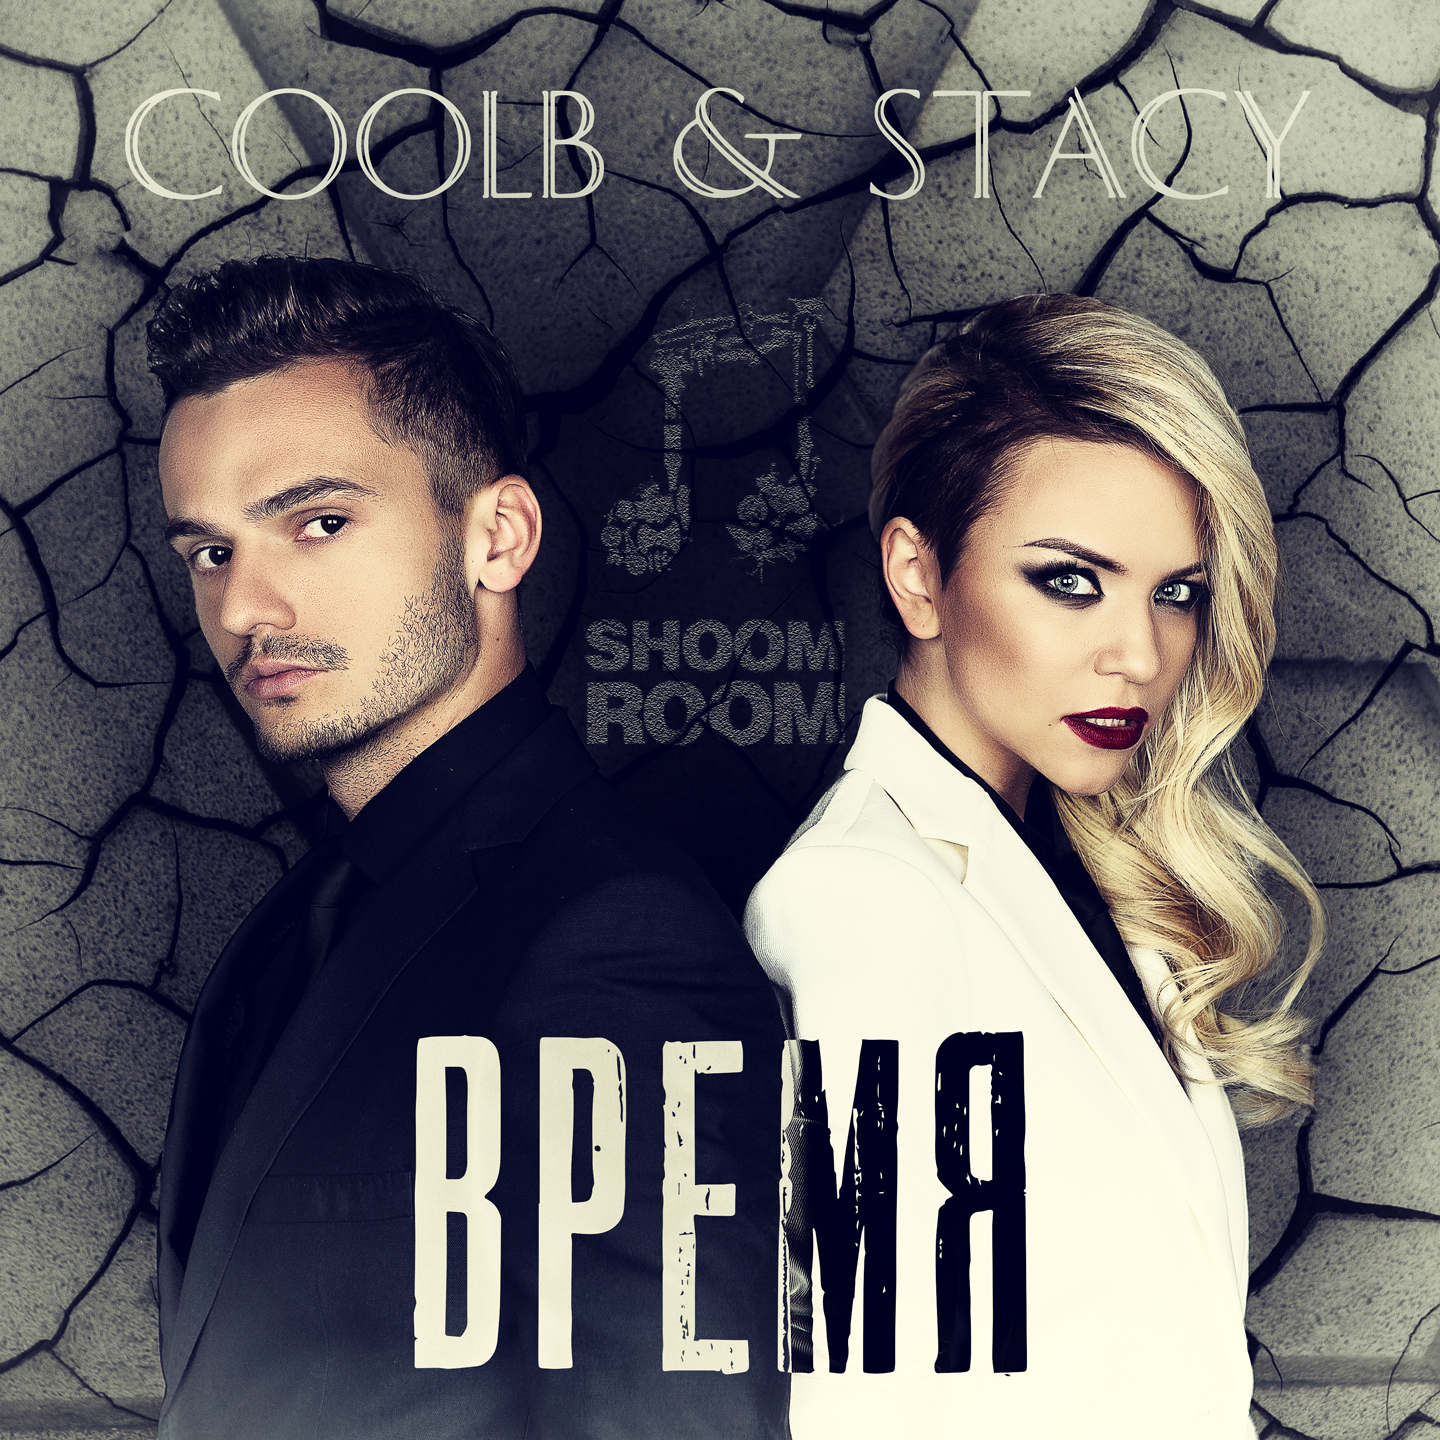 Stacy feat. CoolB [5sta Family] - Время